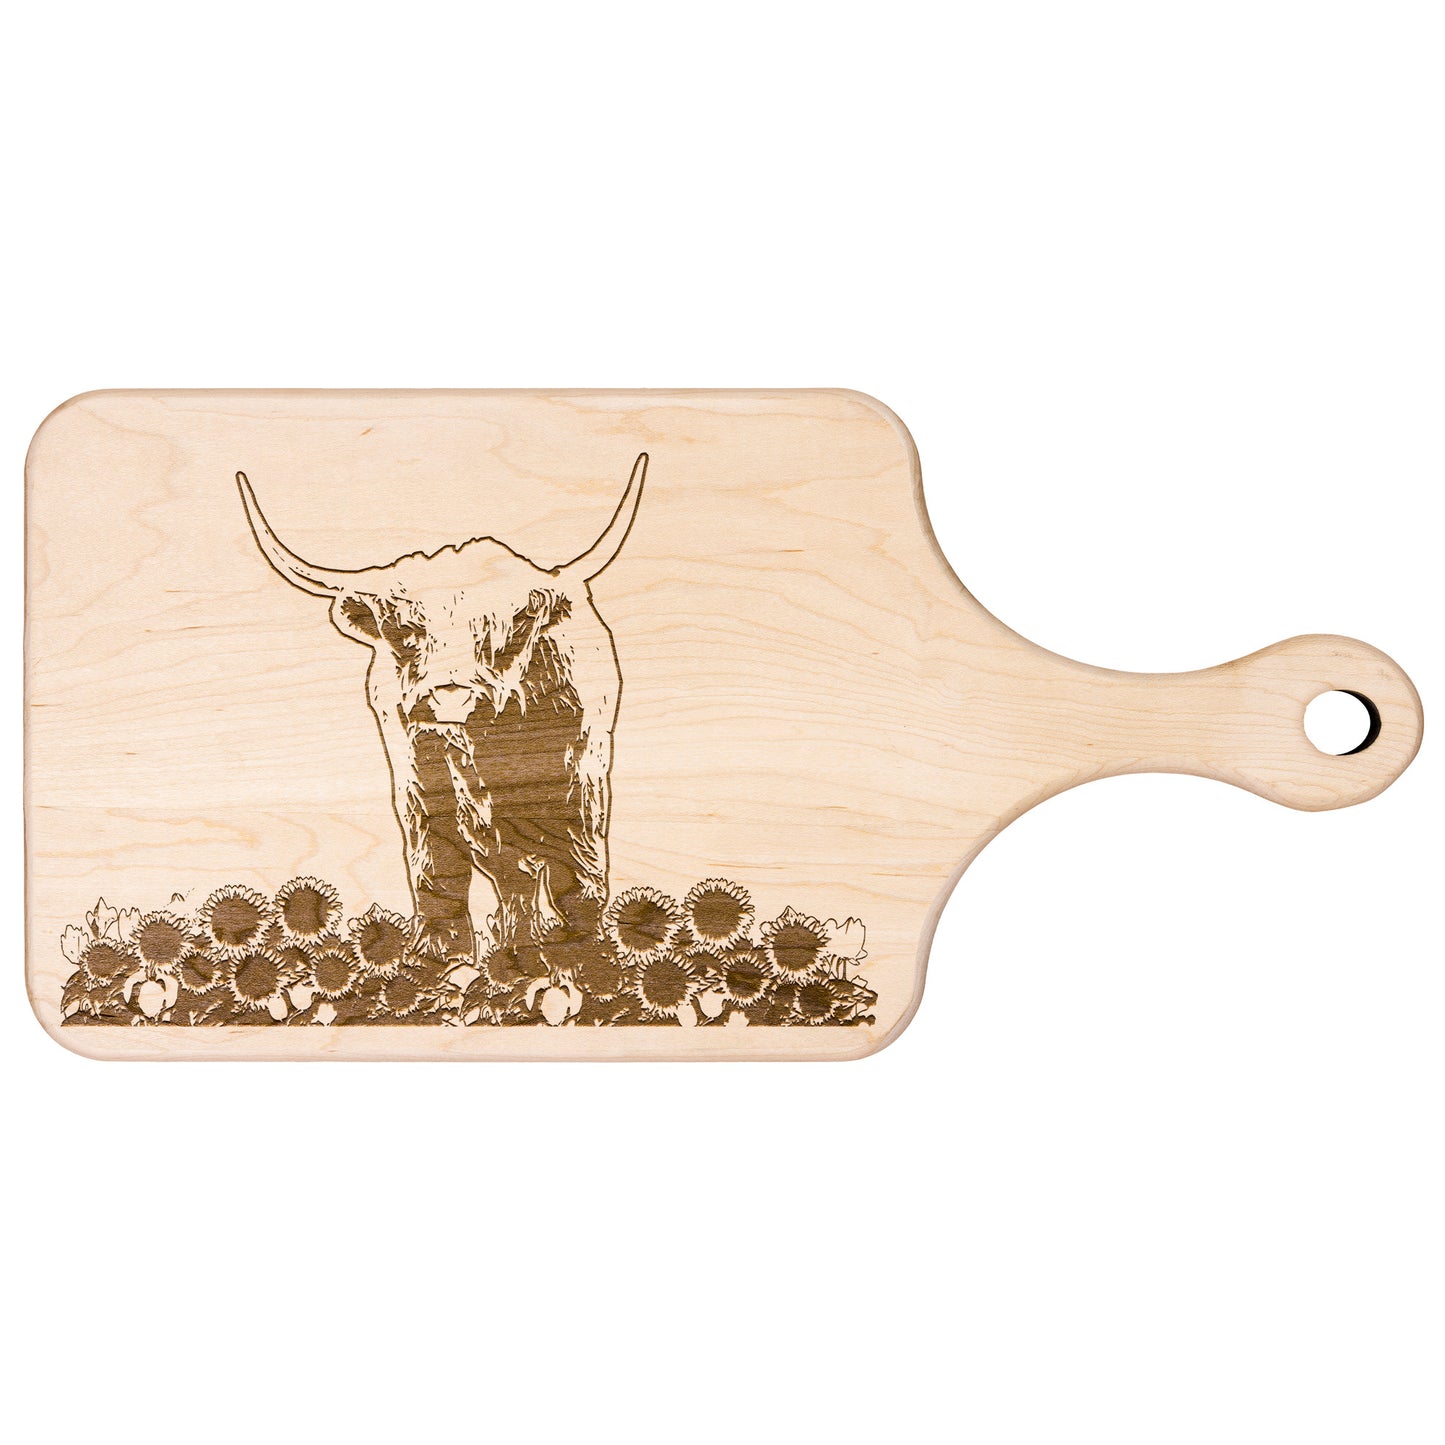 Crafted Elegance: Horizontal Highland Cow and Sunflowers Maple and Walnut Hardwood Cutting Boards | Great Housewarming Gifts